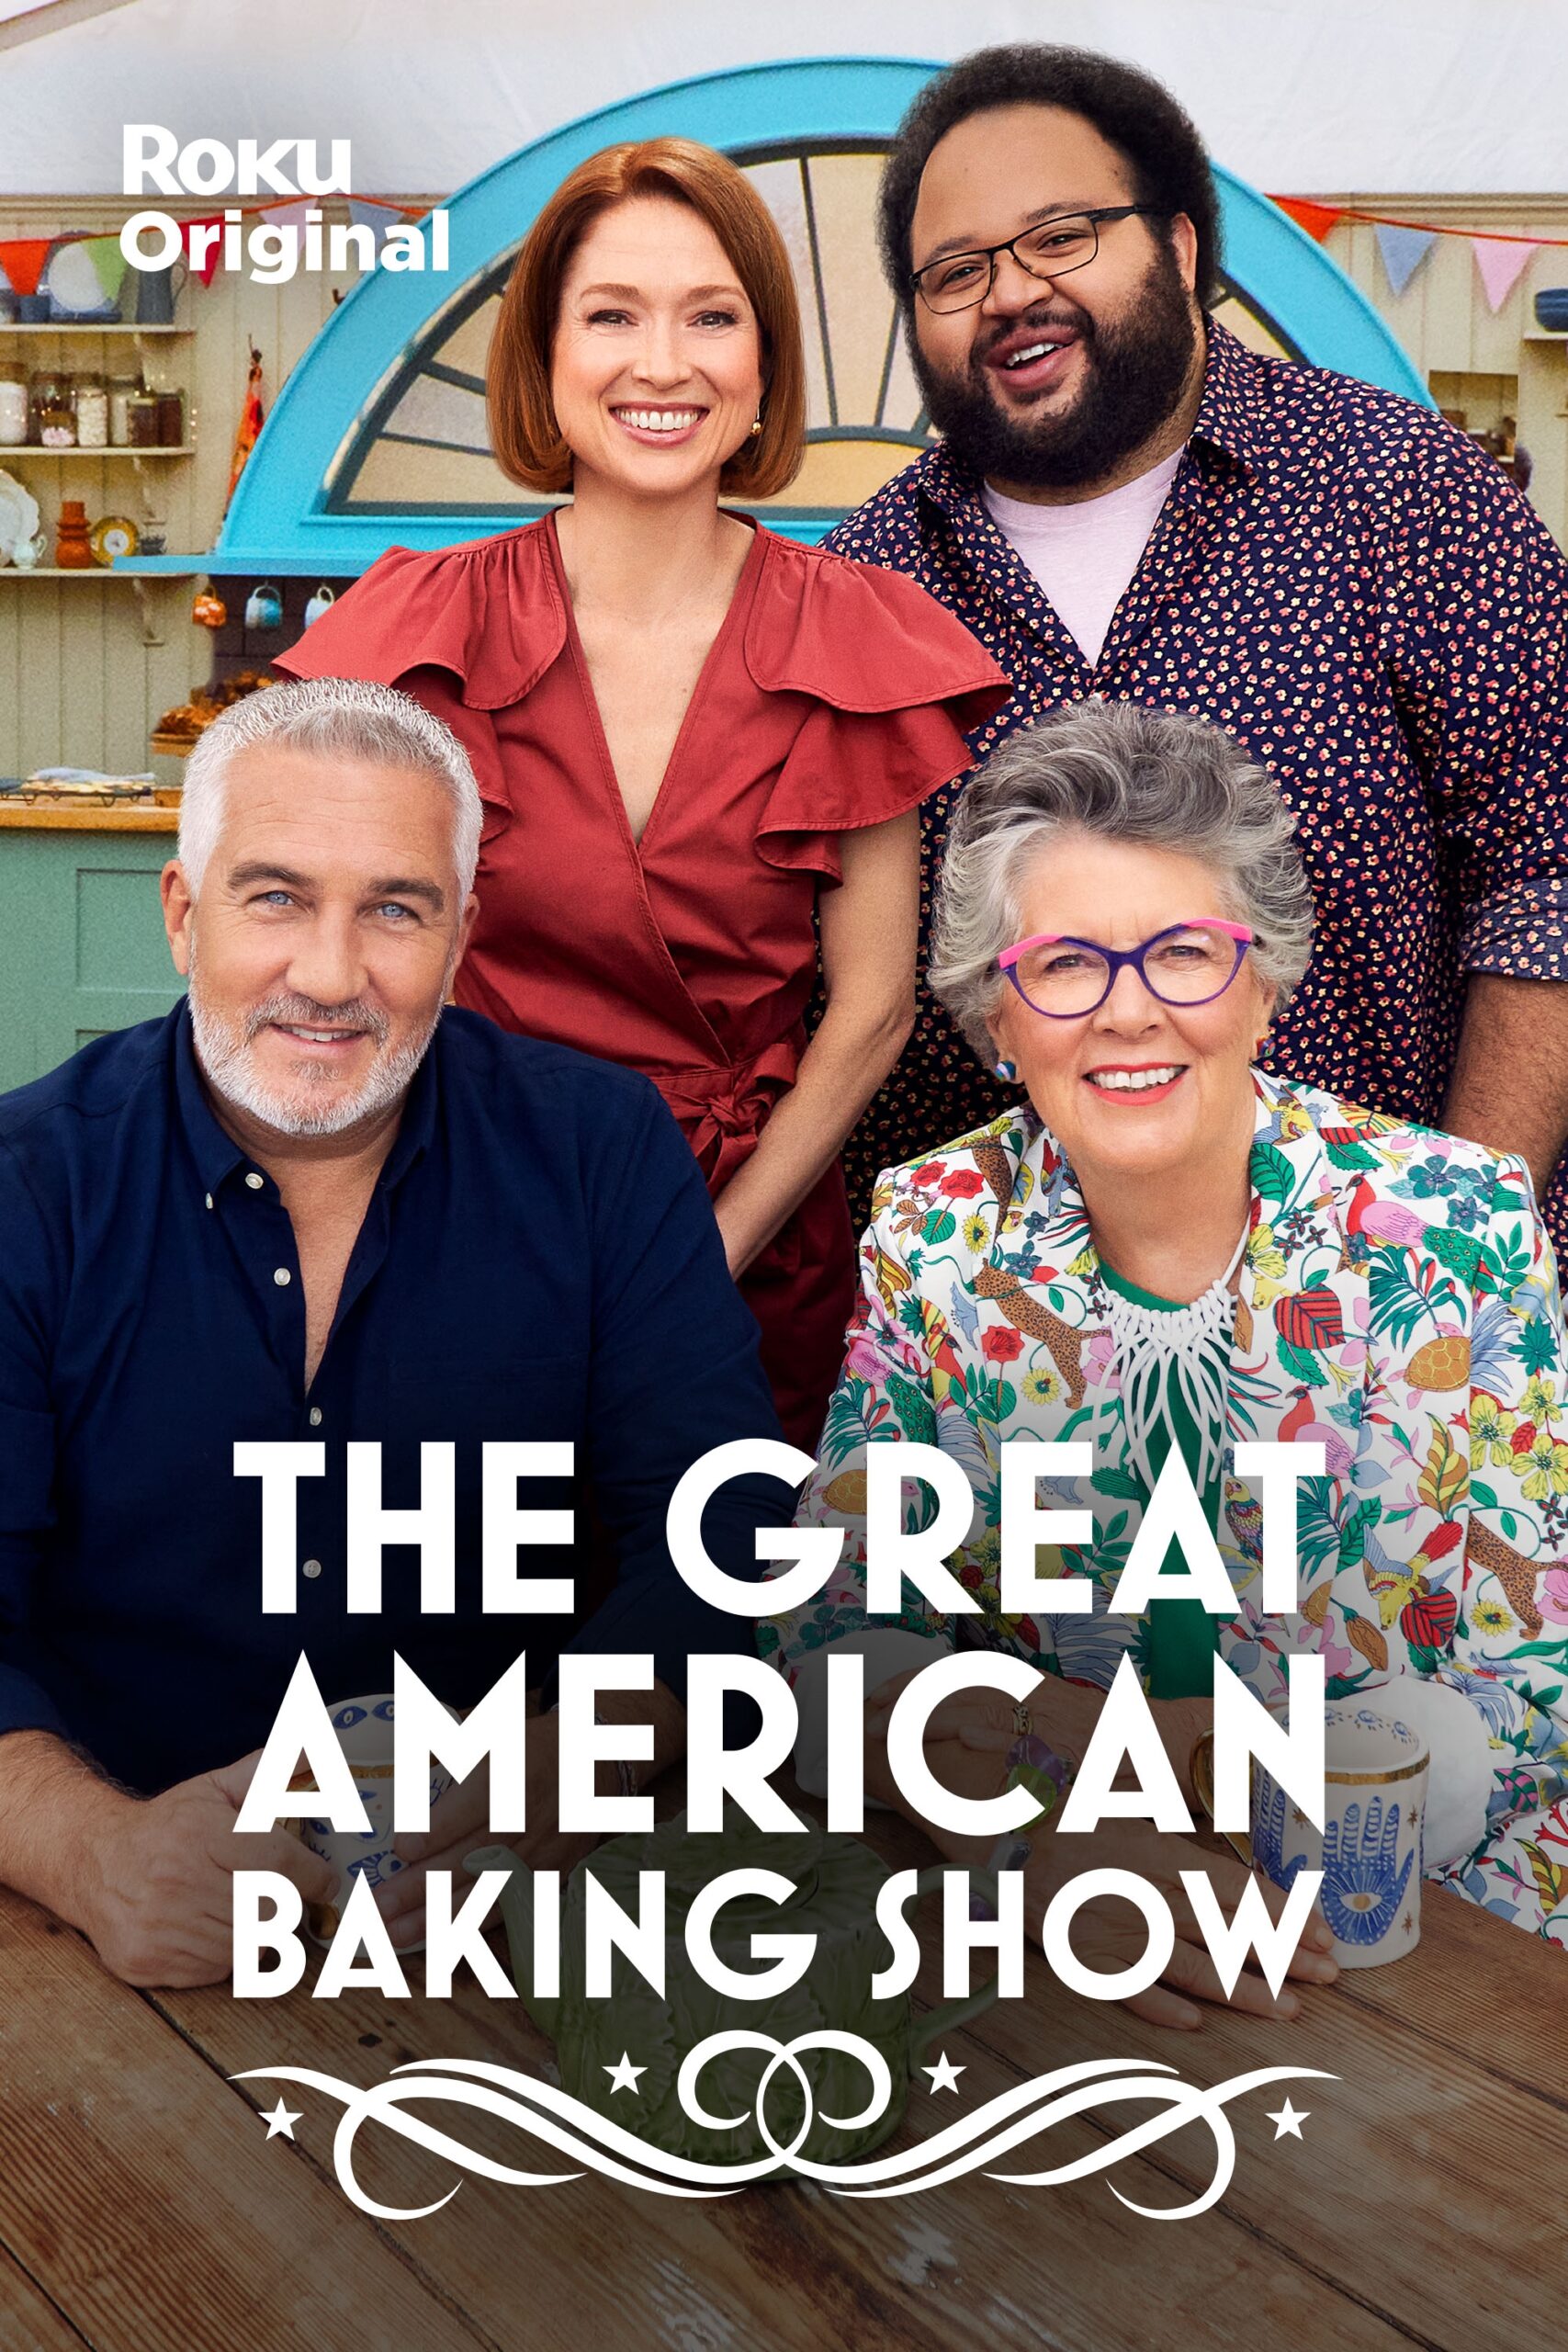 THE GREAT AMERICAN BAKING SHOW Premieres May 5 on The Roku Channel No